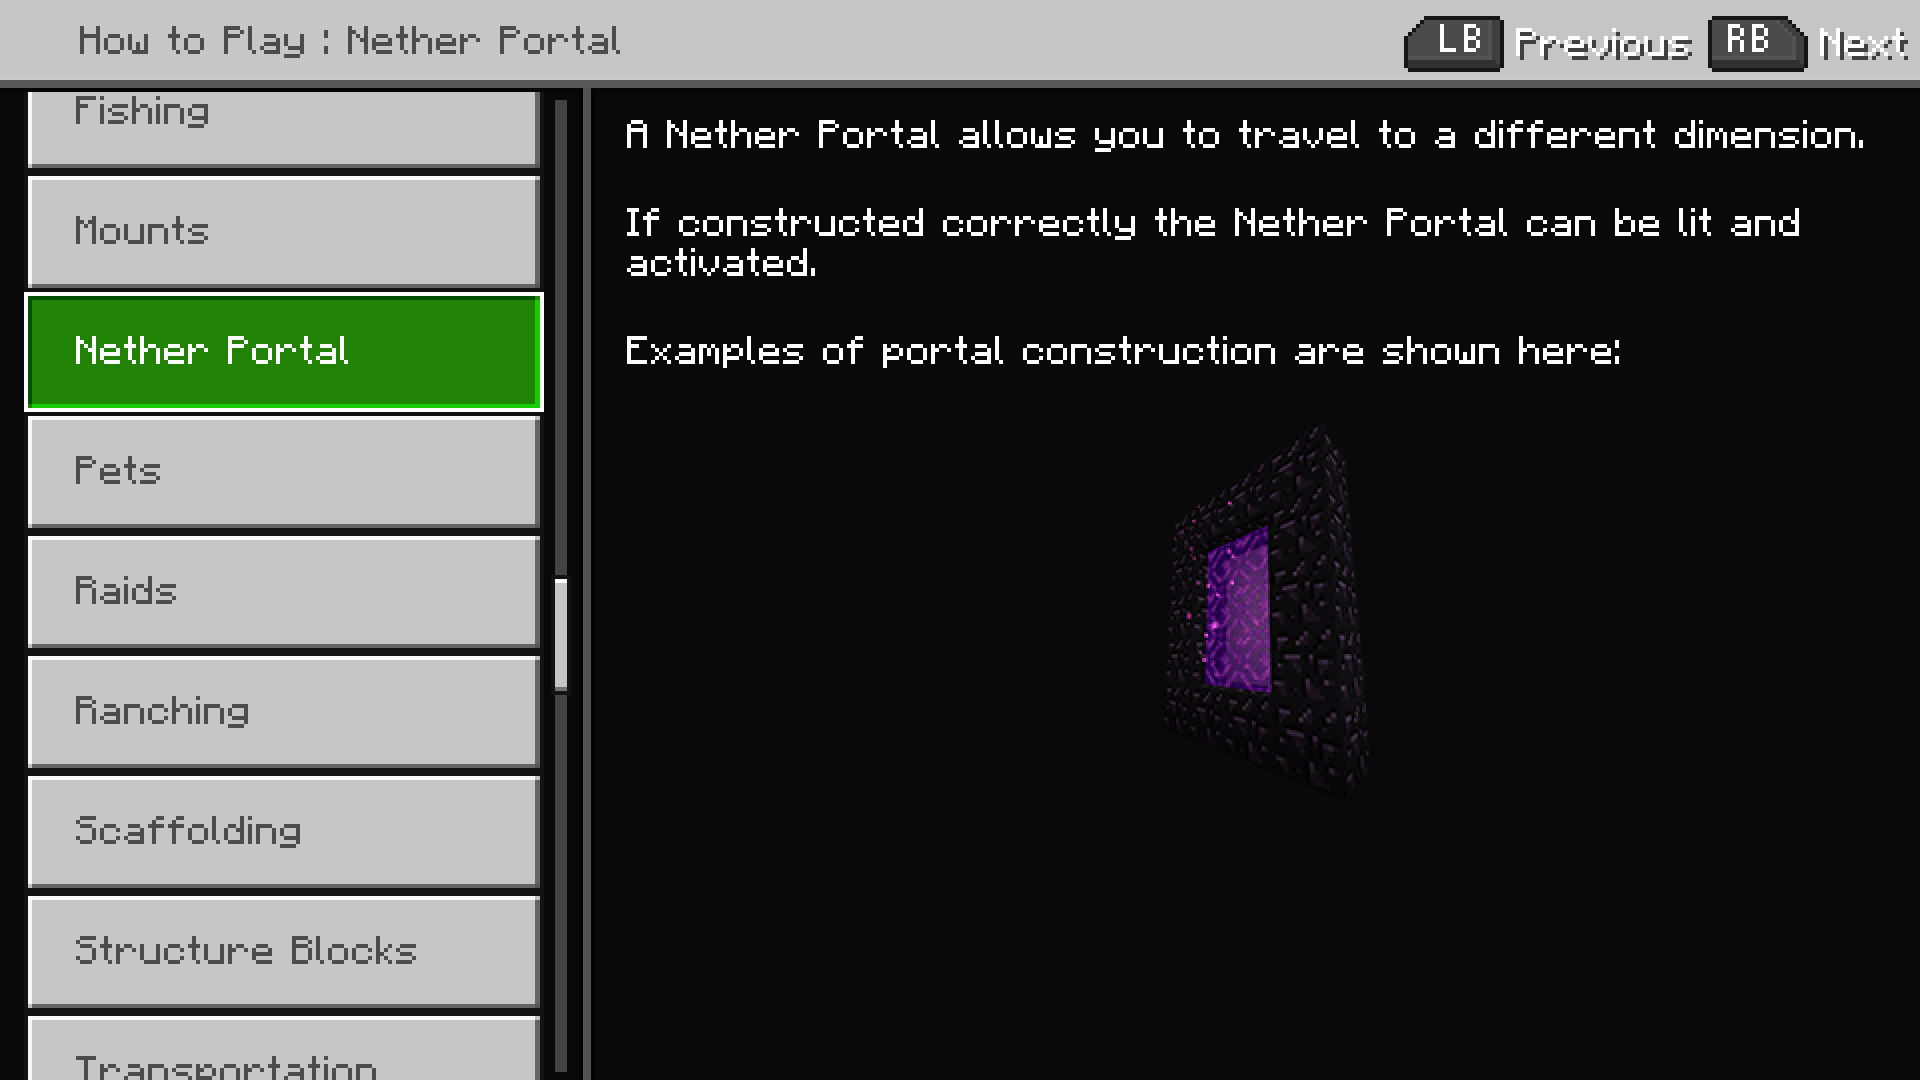 Minecraft screenshot of how to play menu with list of items on left. The focus is on "Nether Portal" and a description and visual of the portal appears on the right. The portal is a purple glowing rectangular doorway with a frame. The description reads, "A Nether Portal allows you to travel to a different dimension. If constructed correctly the Nether Portal can be lit and activated. Examples of portal construction are shown here."